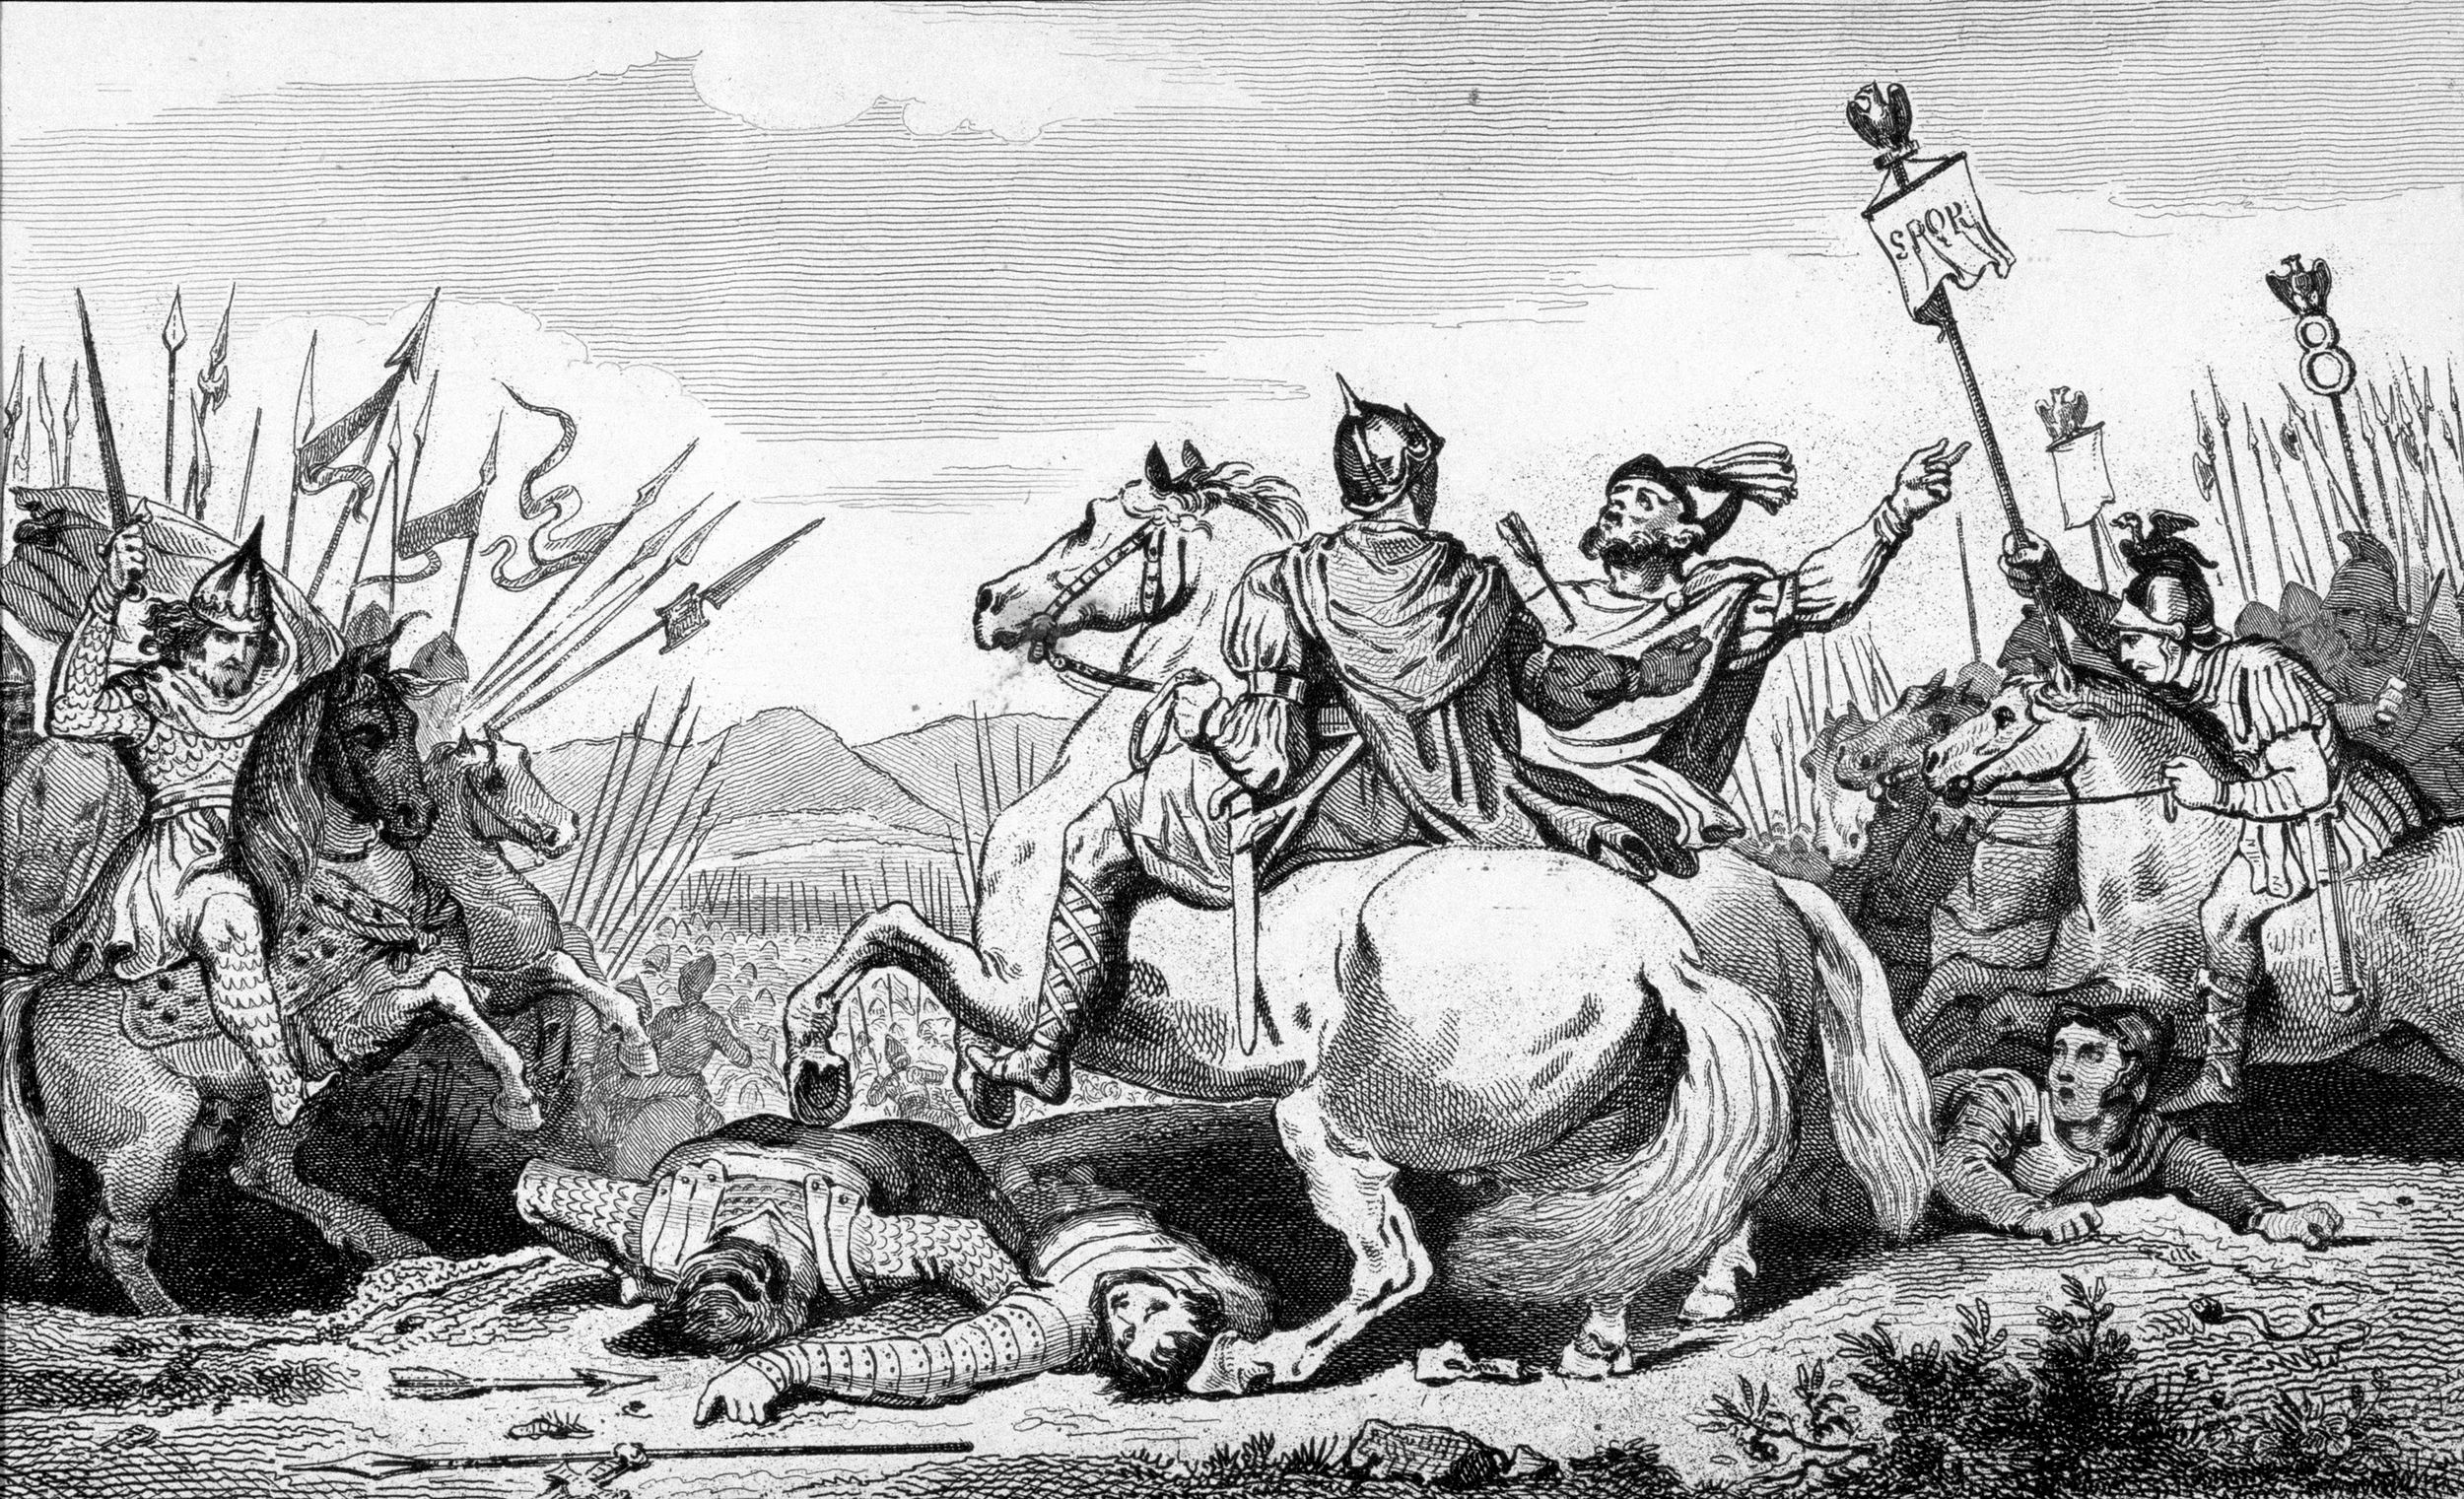 Theodoric, king of the Visigoths and ally to the Romans, falls in battle against Attila near Chalons in this 19th-century engraving.